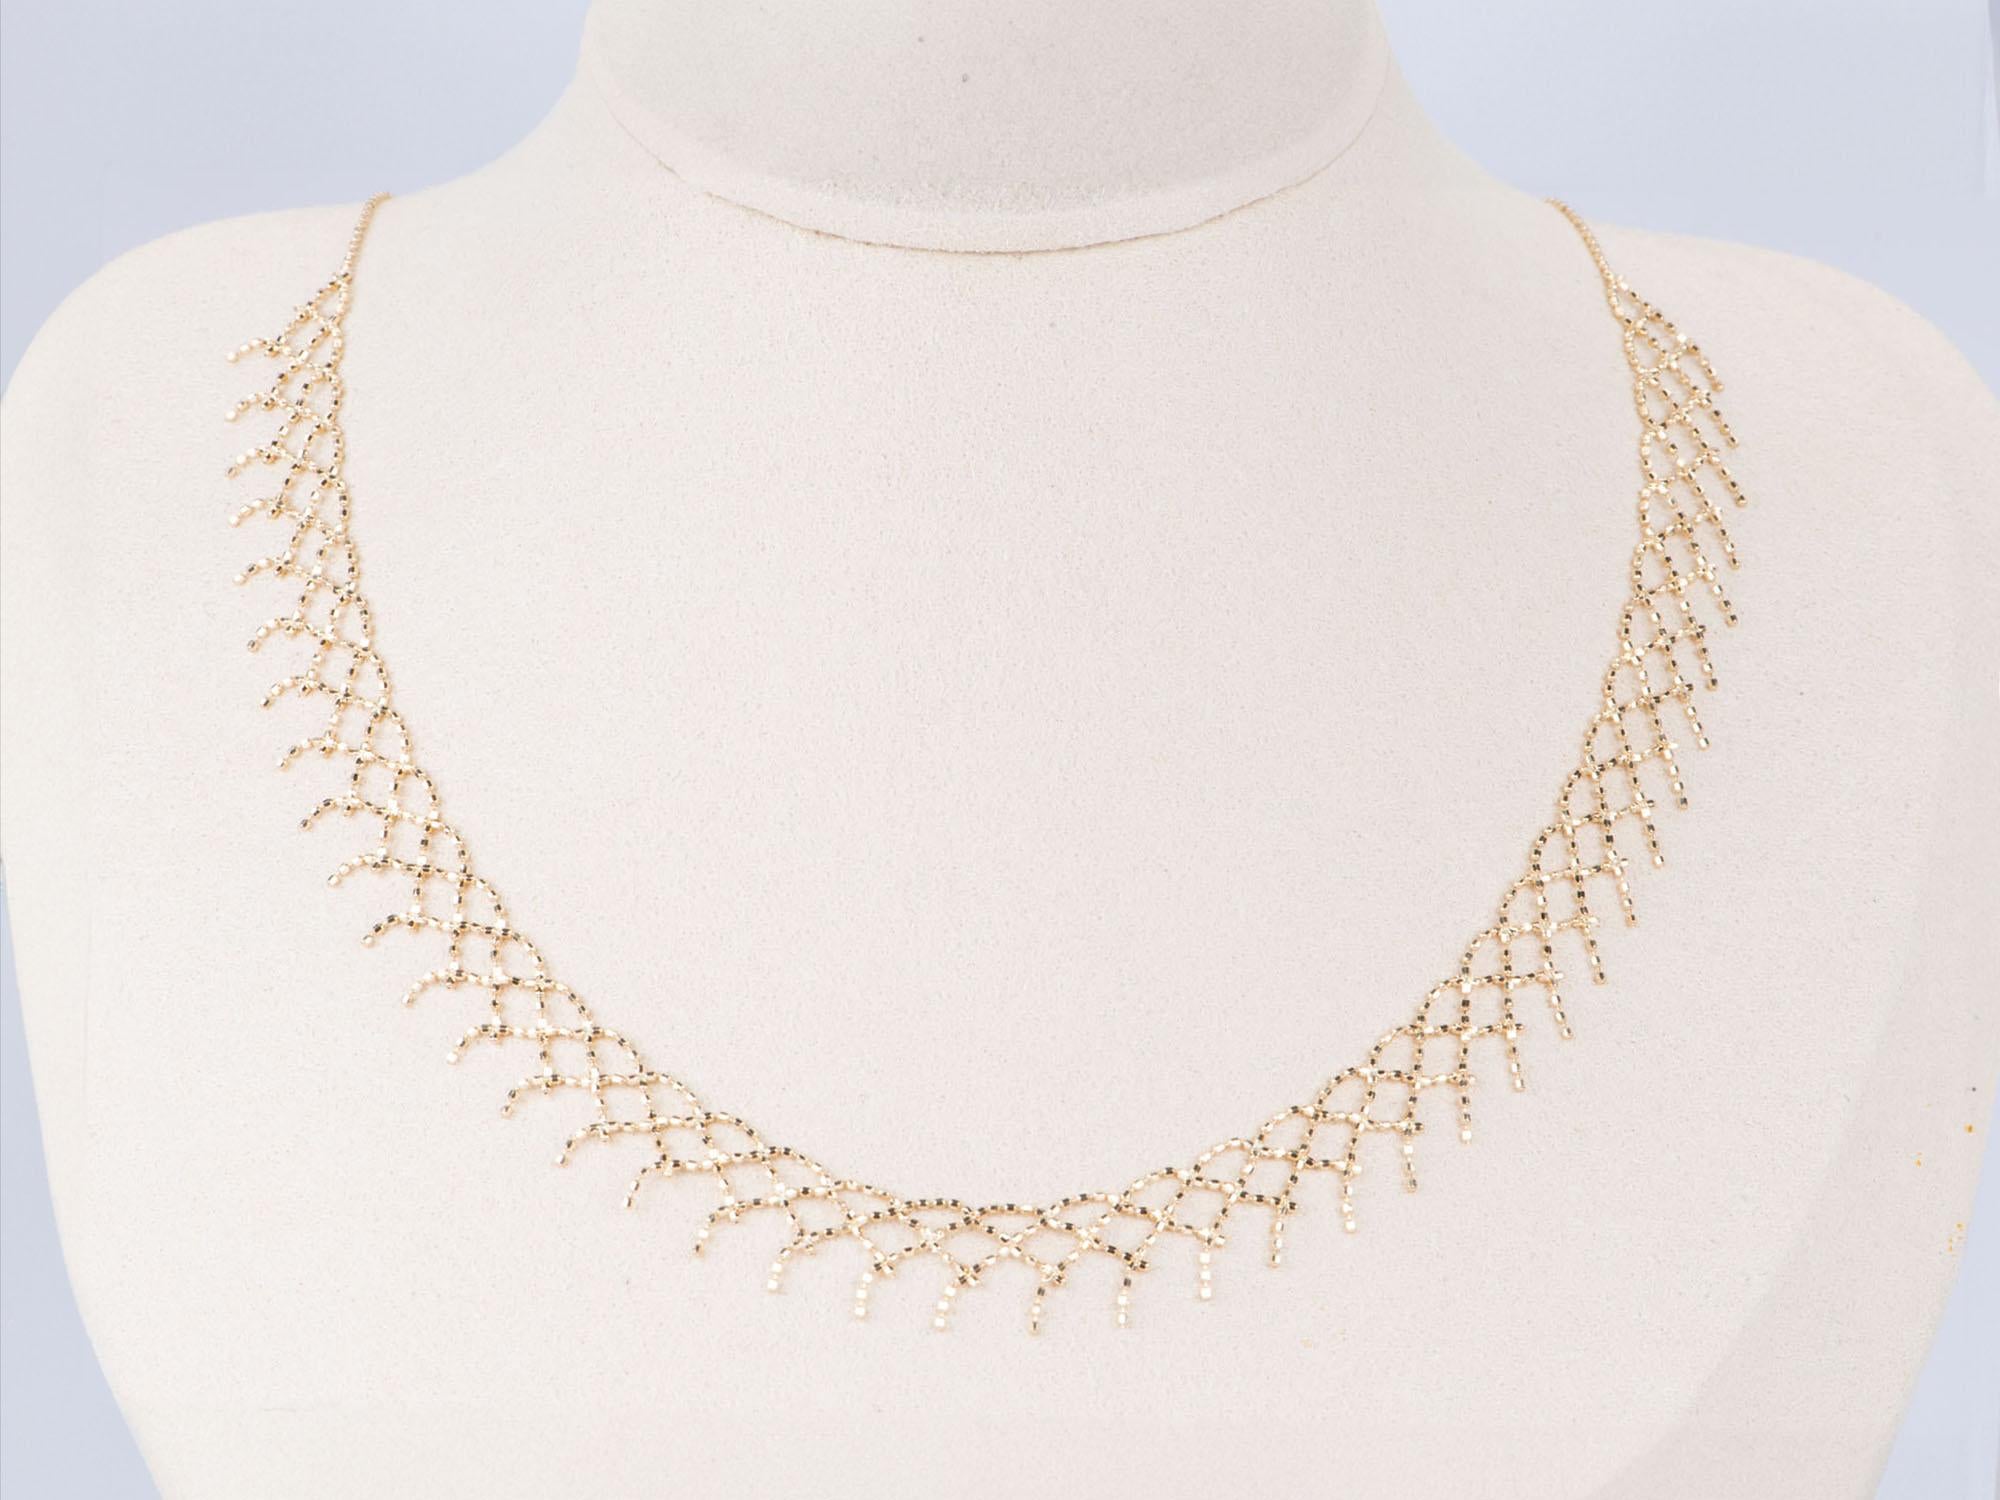 18K Gold Delicate Lace Necklace 3.98g For Sale 1